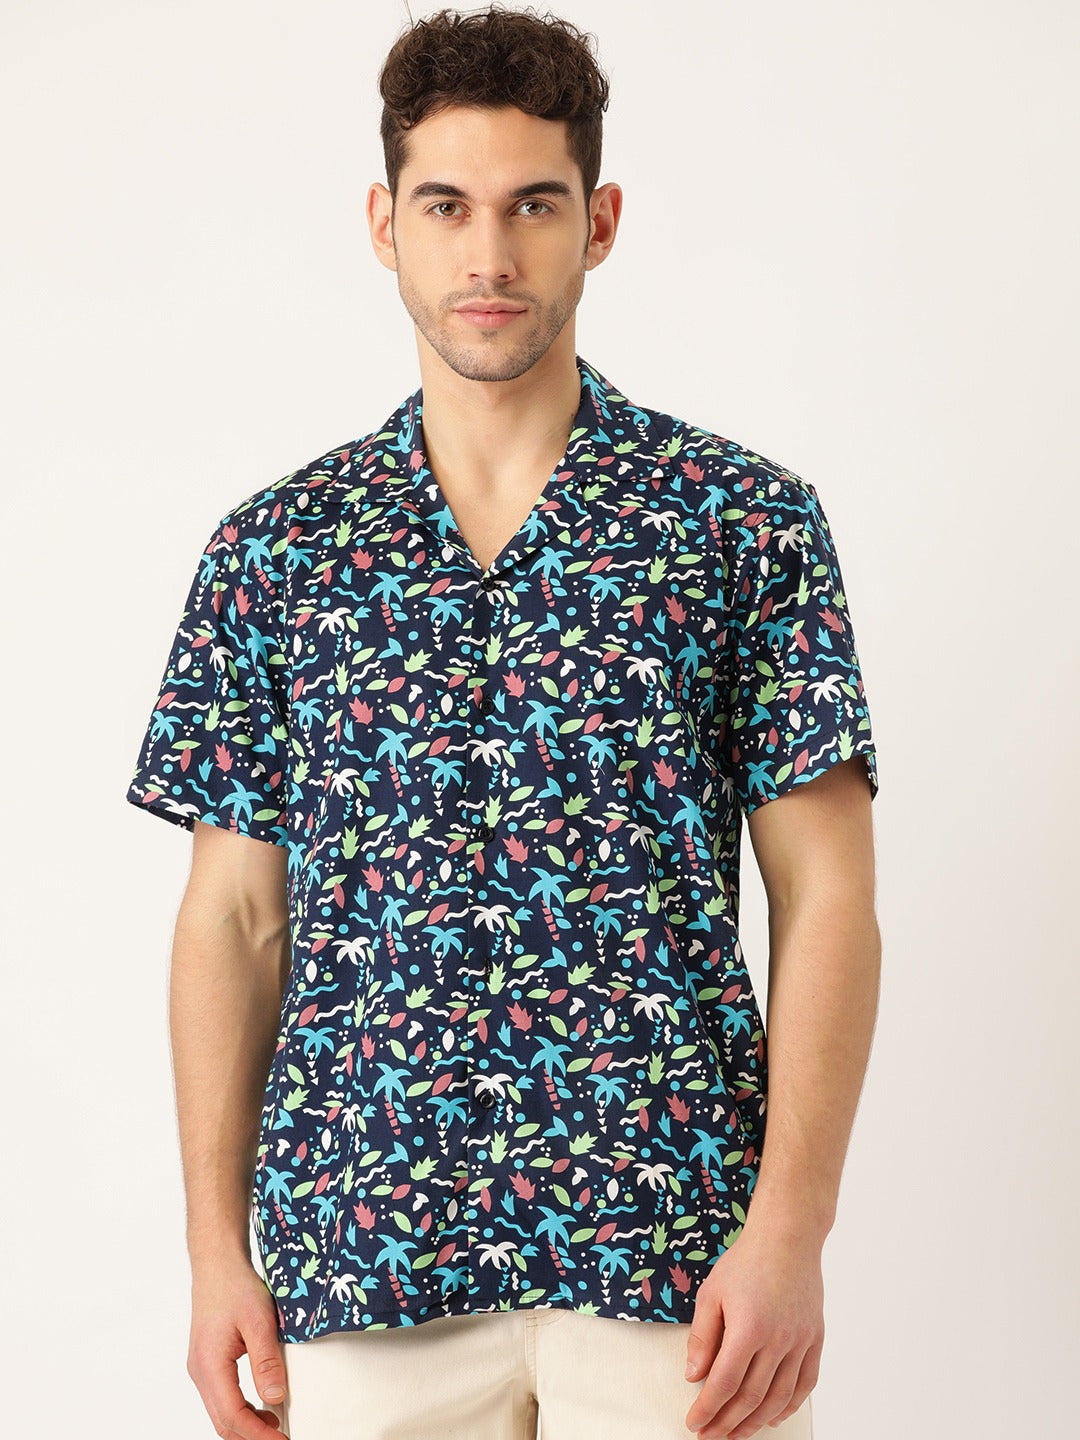 Men Navy Printed Pure Cotton Relaxed Fit Casual Resort Shirt